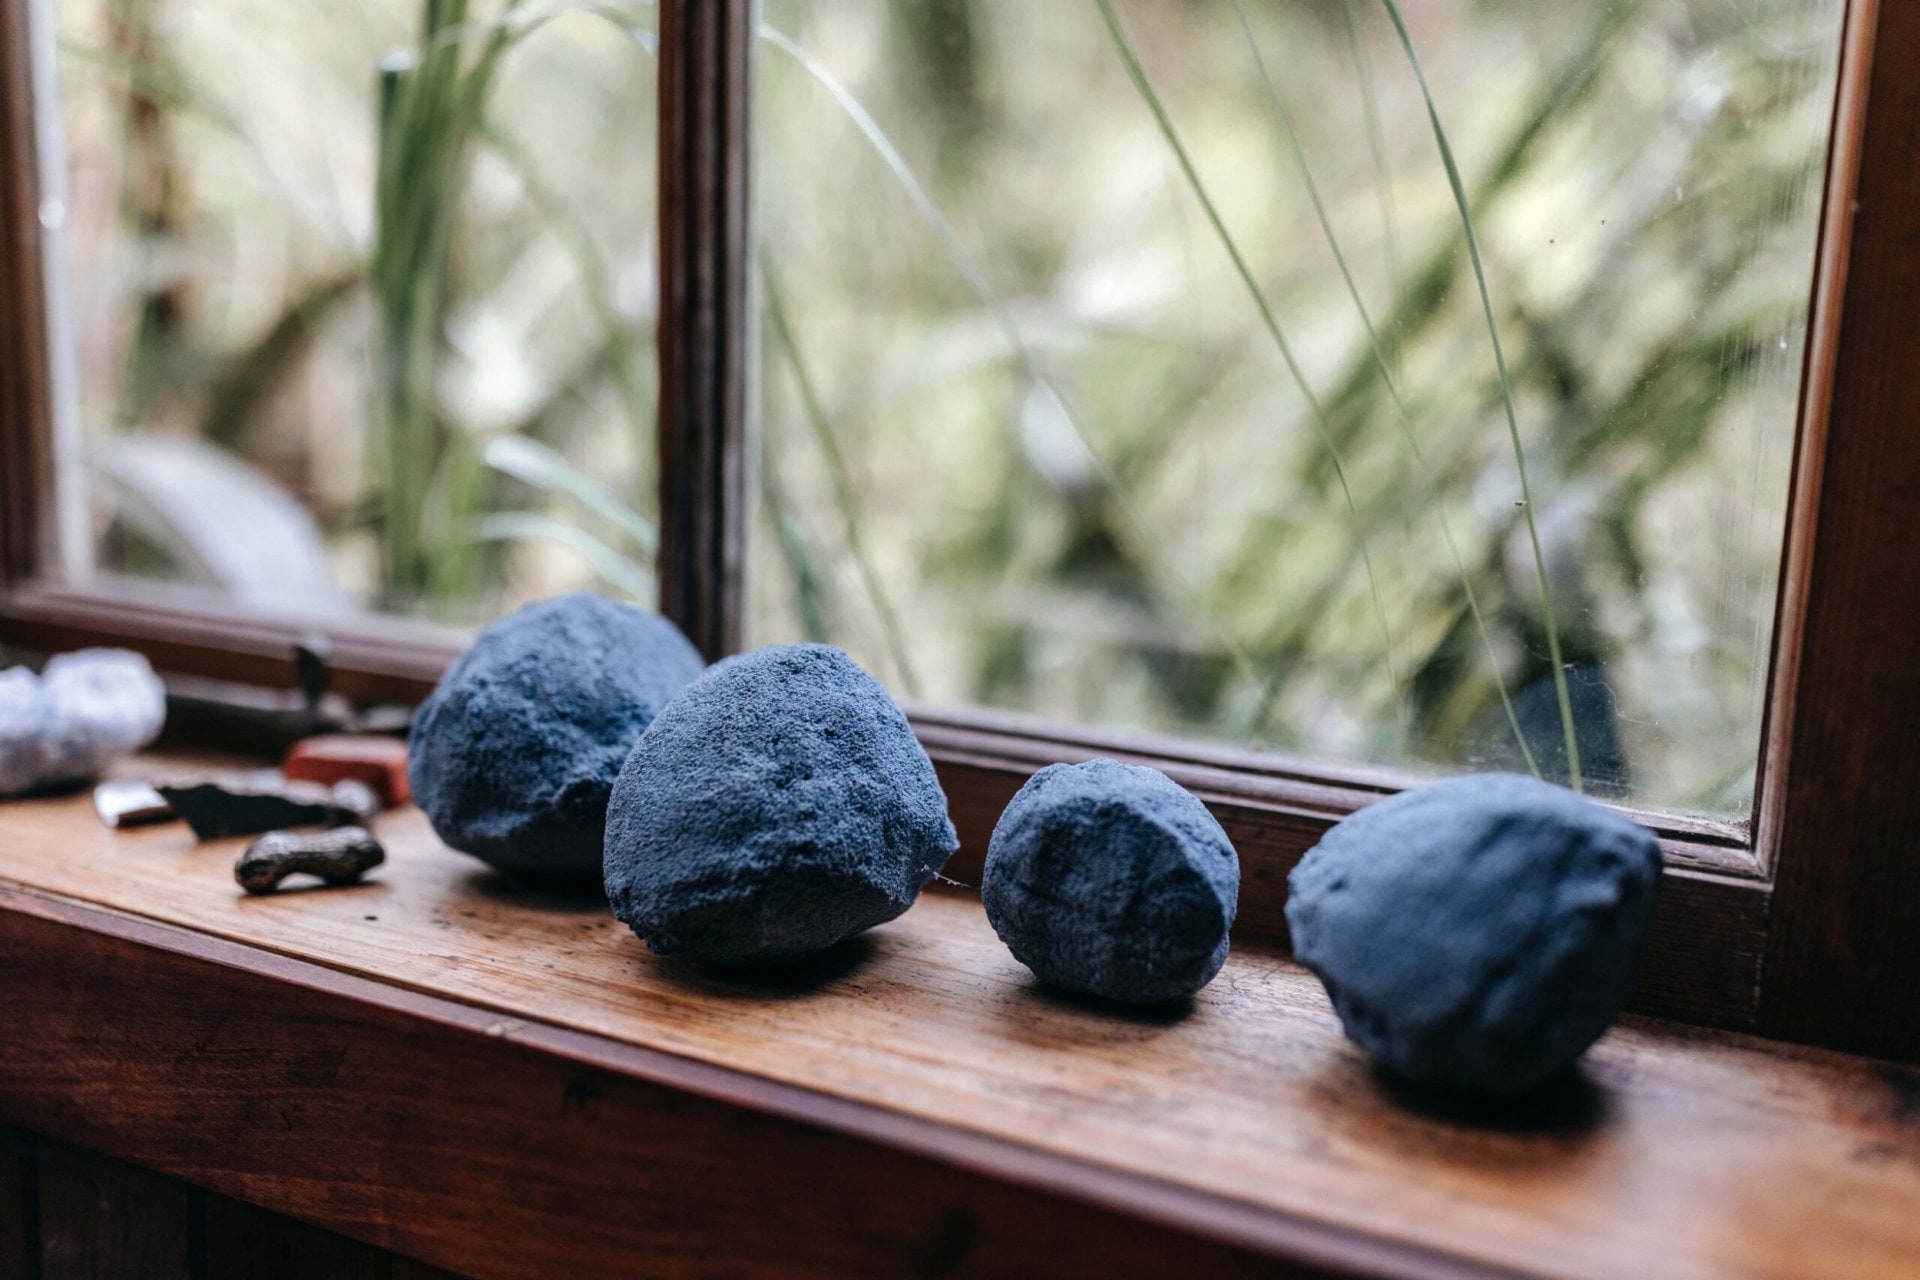 Black round art installations by artist Kate Newby on a wooden windowsill